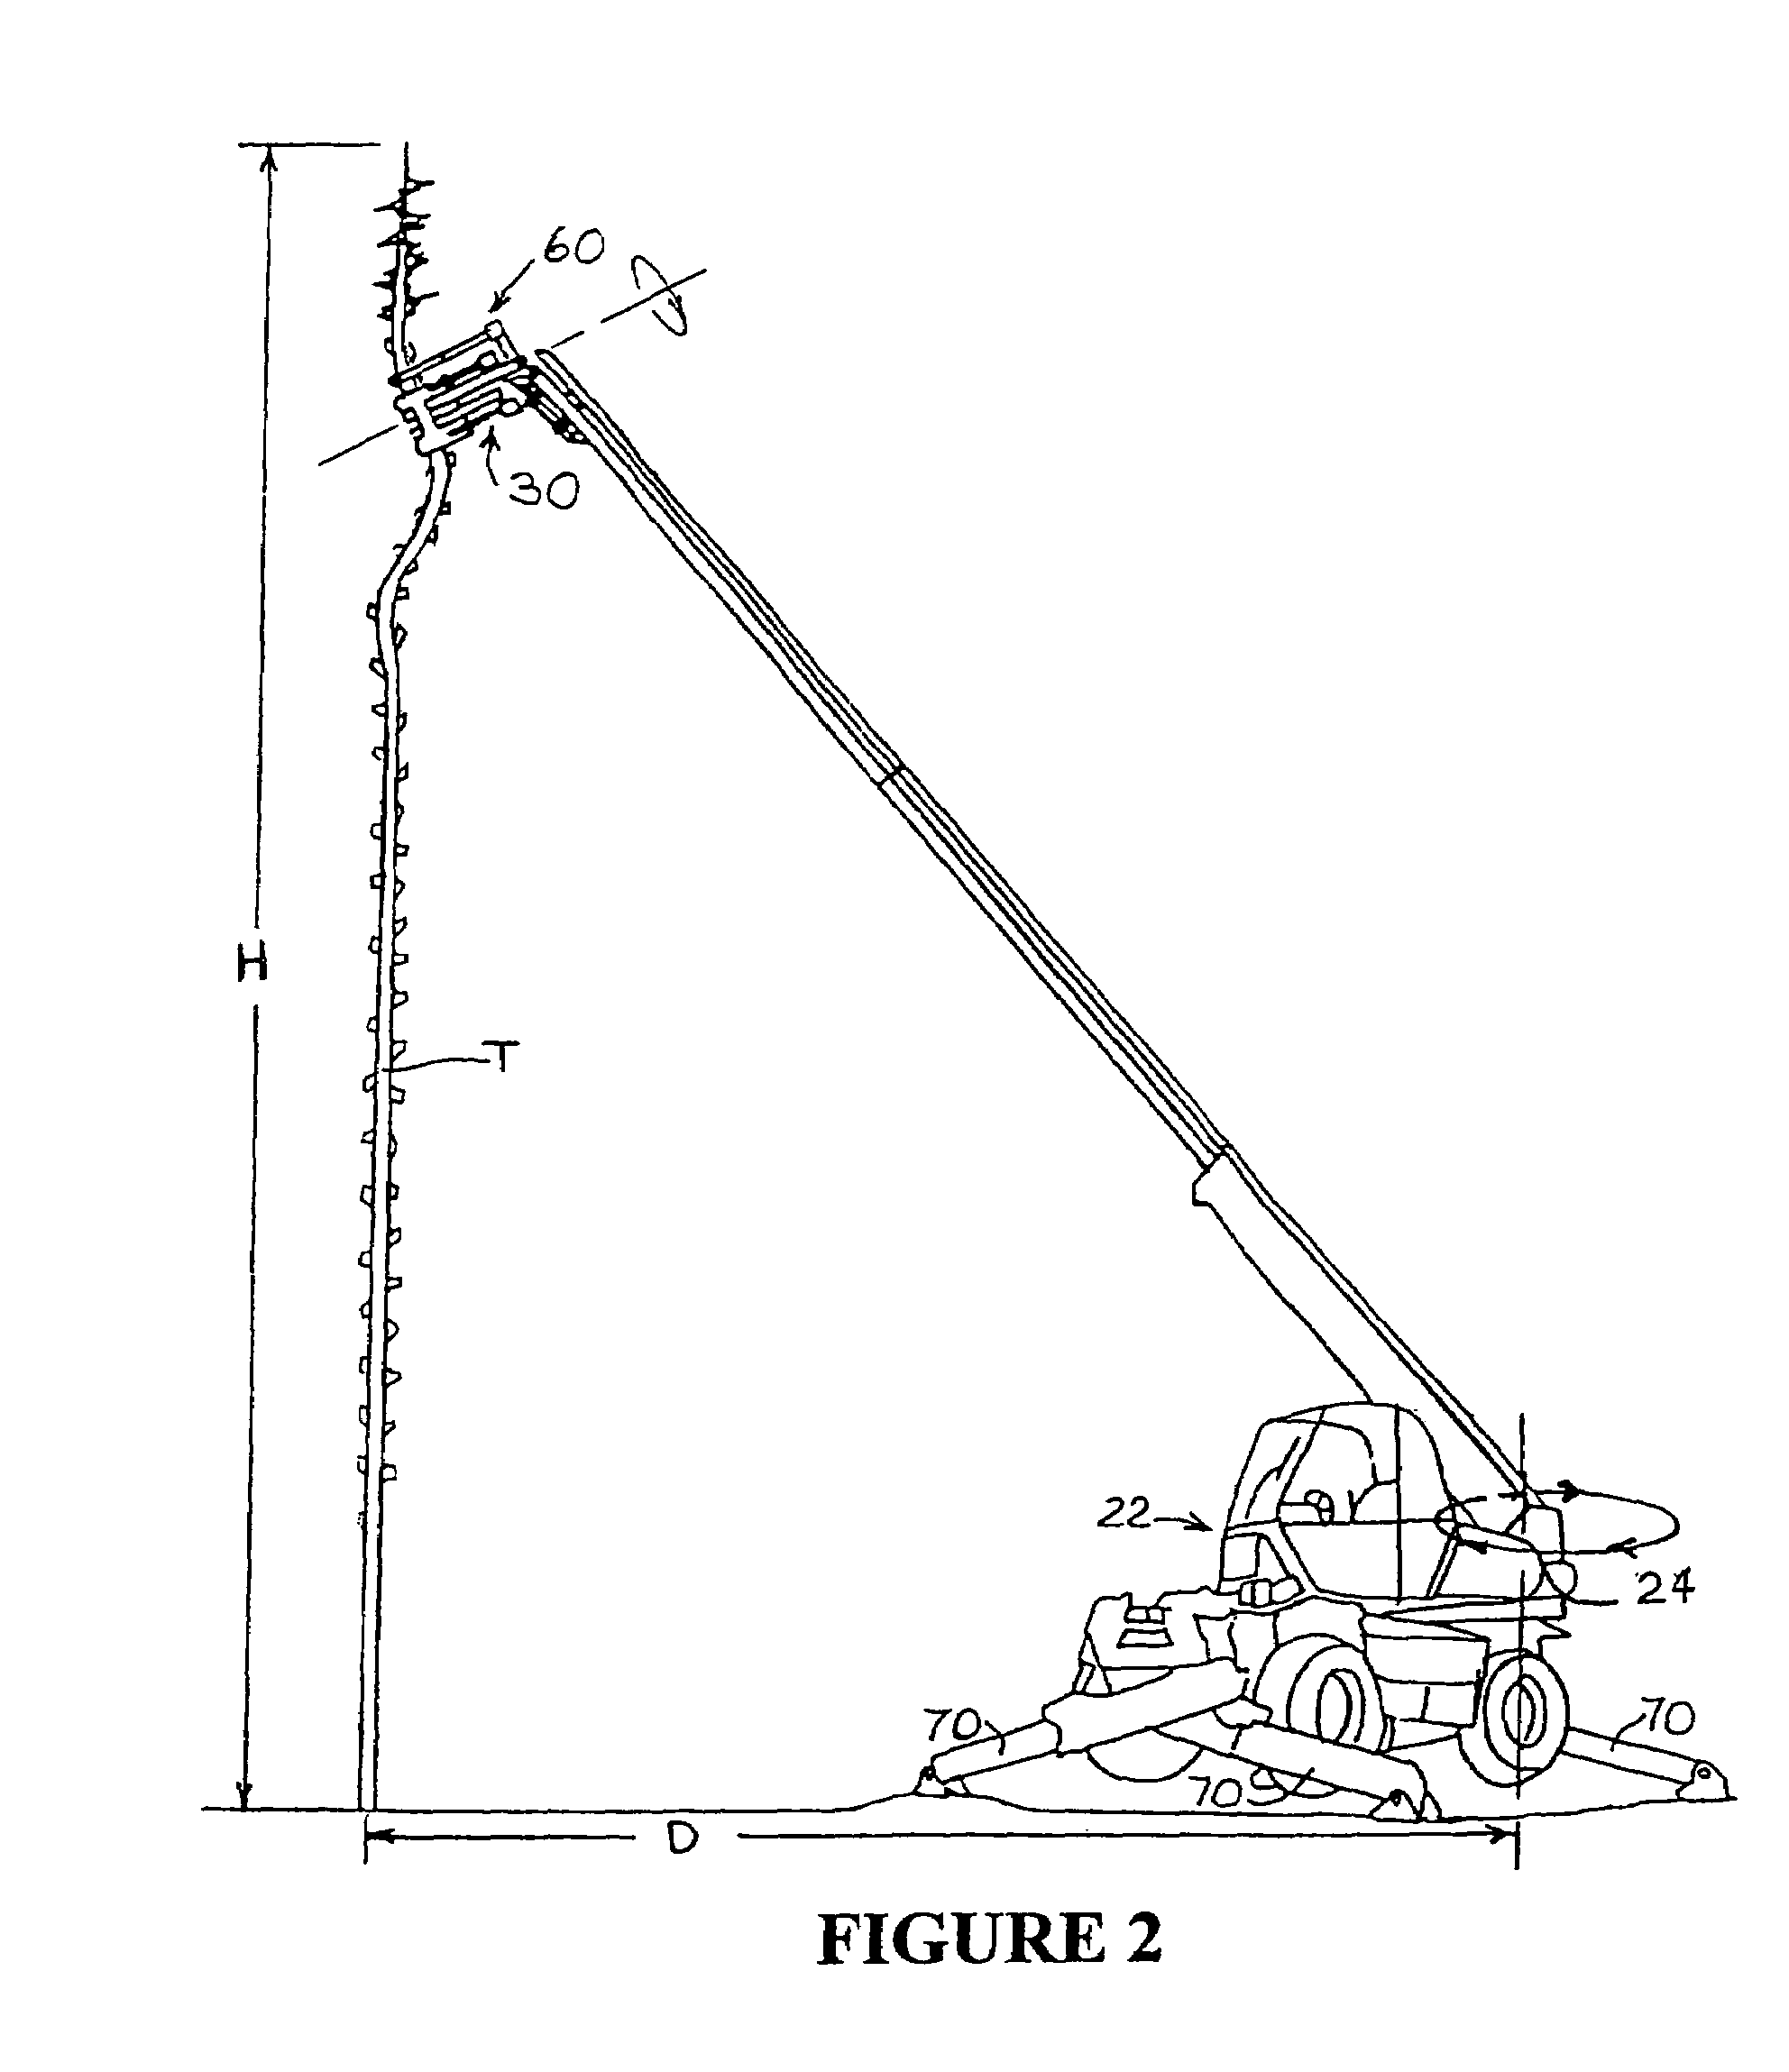 Tree harvesting apparatus and method which enable a cut top or other cut portion of a tree to be weighed before being dropped or lowered to the ground